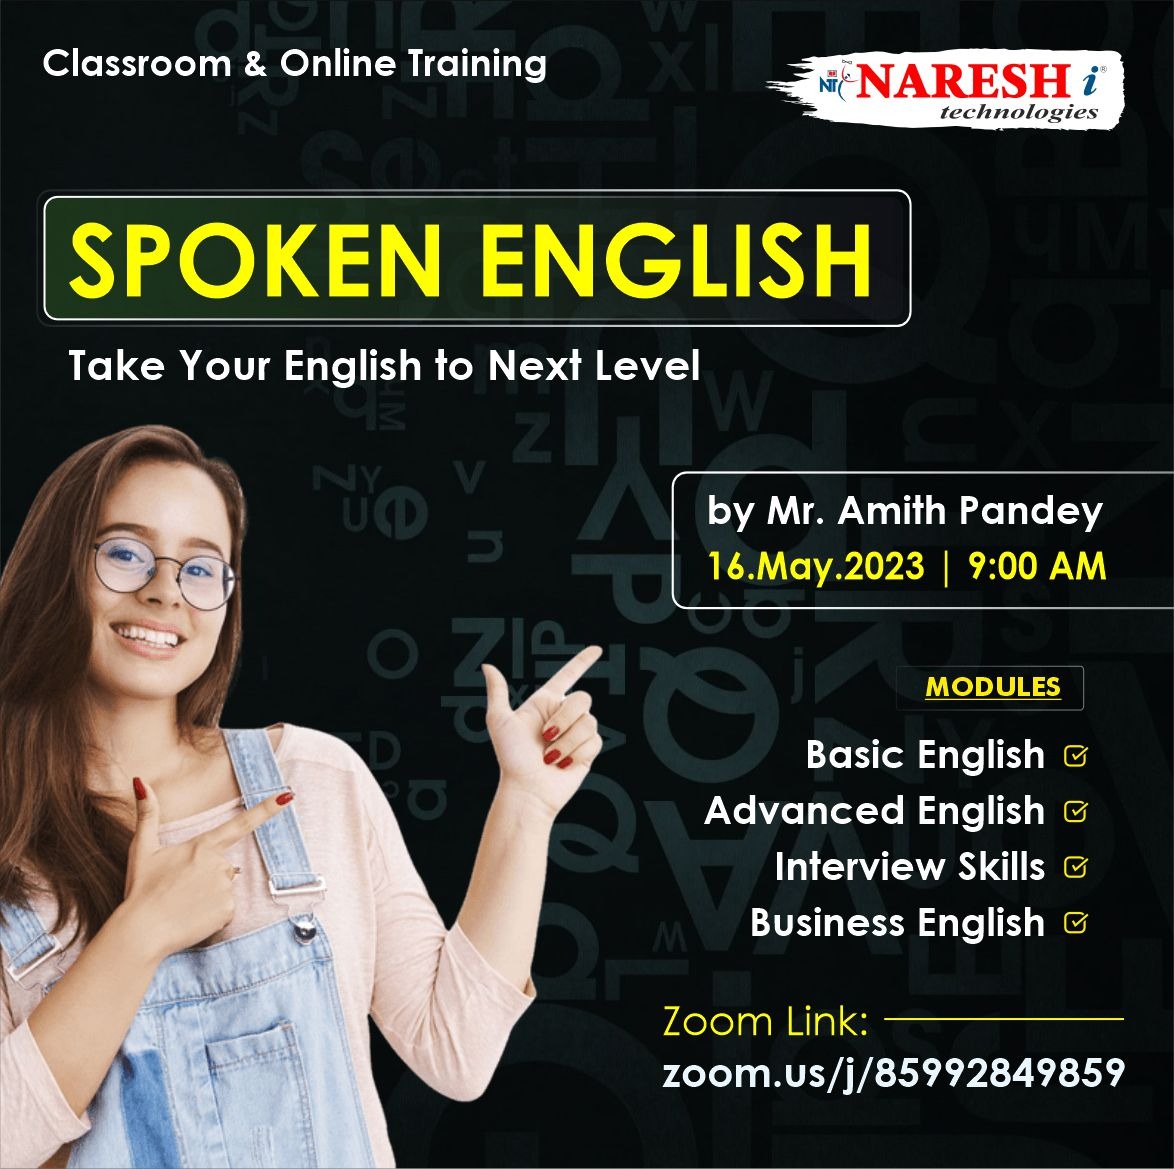 Free Demo On Spoken English By Mr. Amit Pandey - NareshIT, Online Event